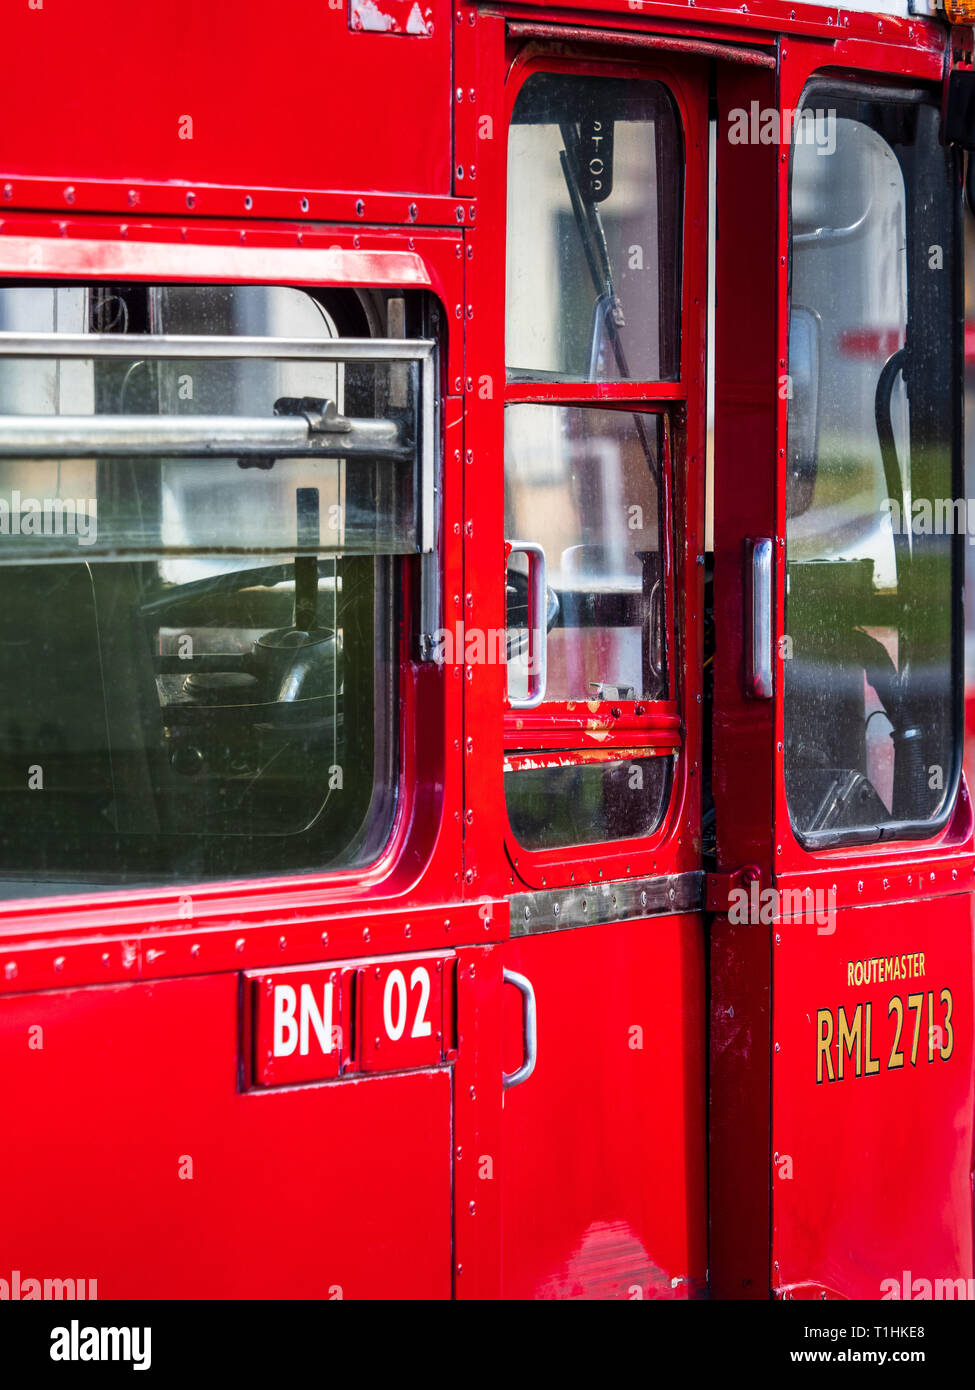 London Classic Routemaster Bus - a classic London routemaster bus now used for tourist bus trips around the sights of London. Stock Photo